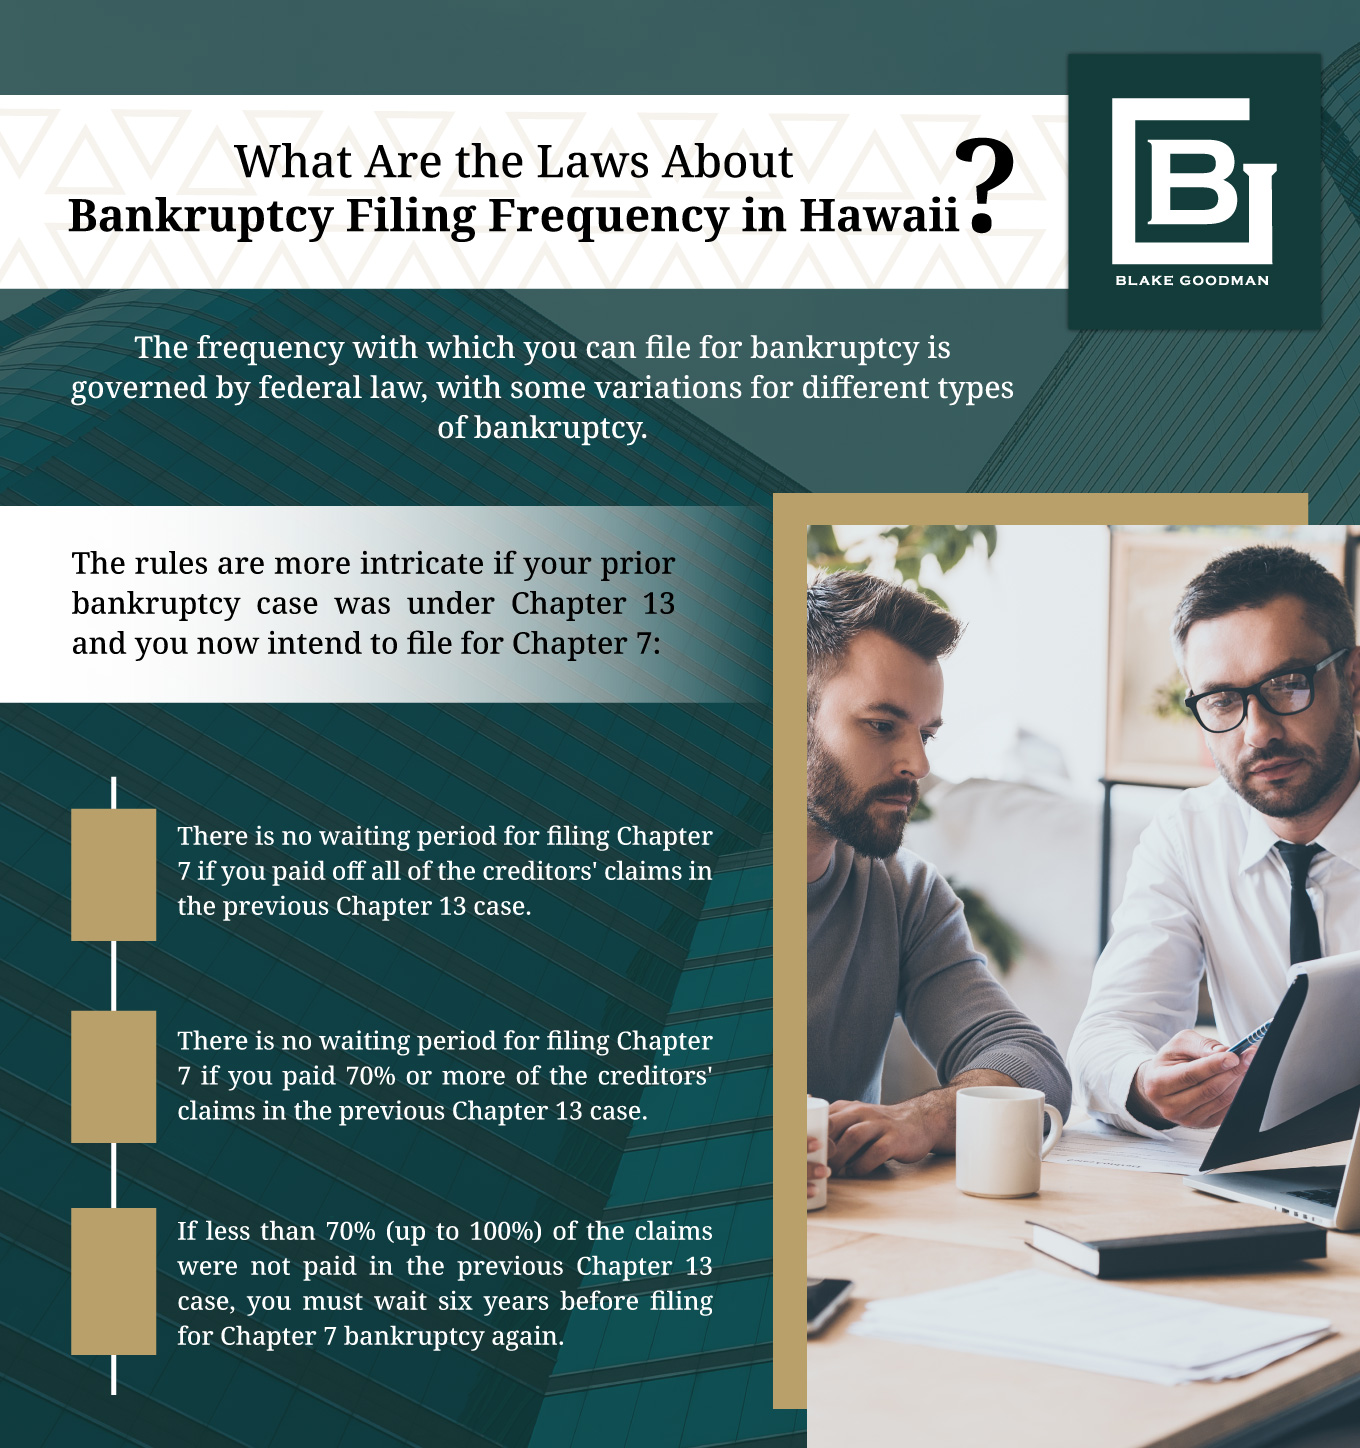 Infographic that shows the Laws About Bankruptcy Filing Frequency in Hawaii